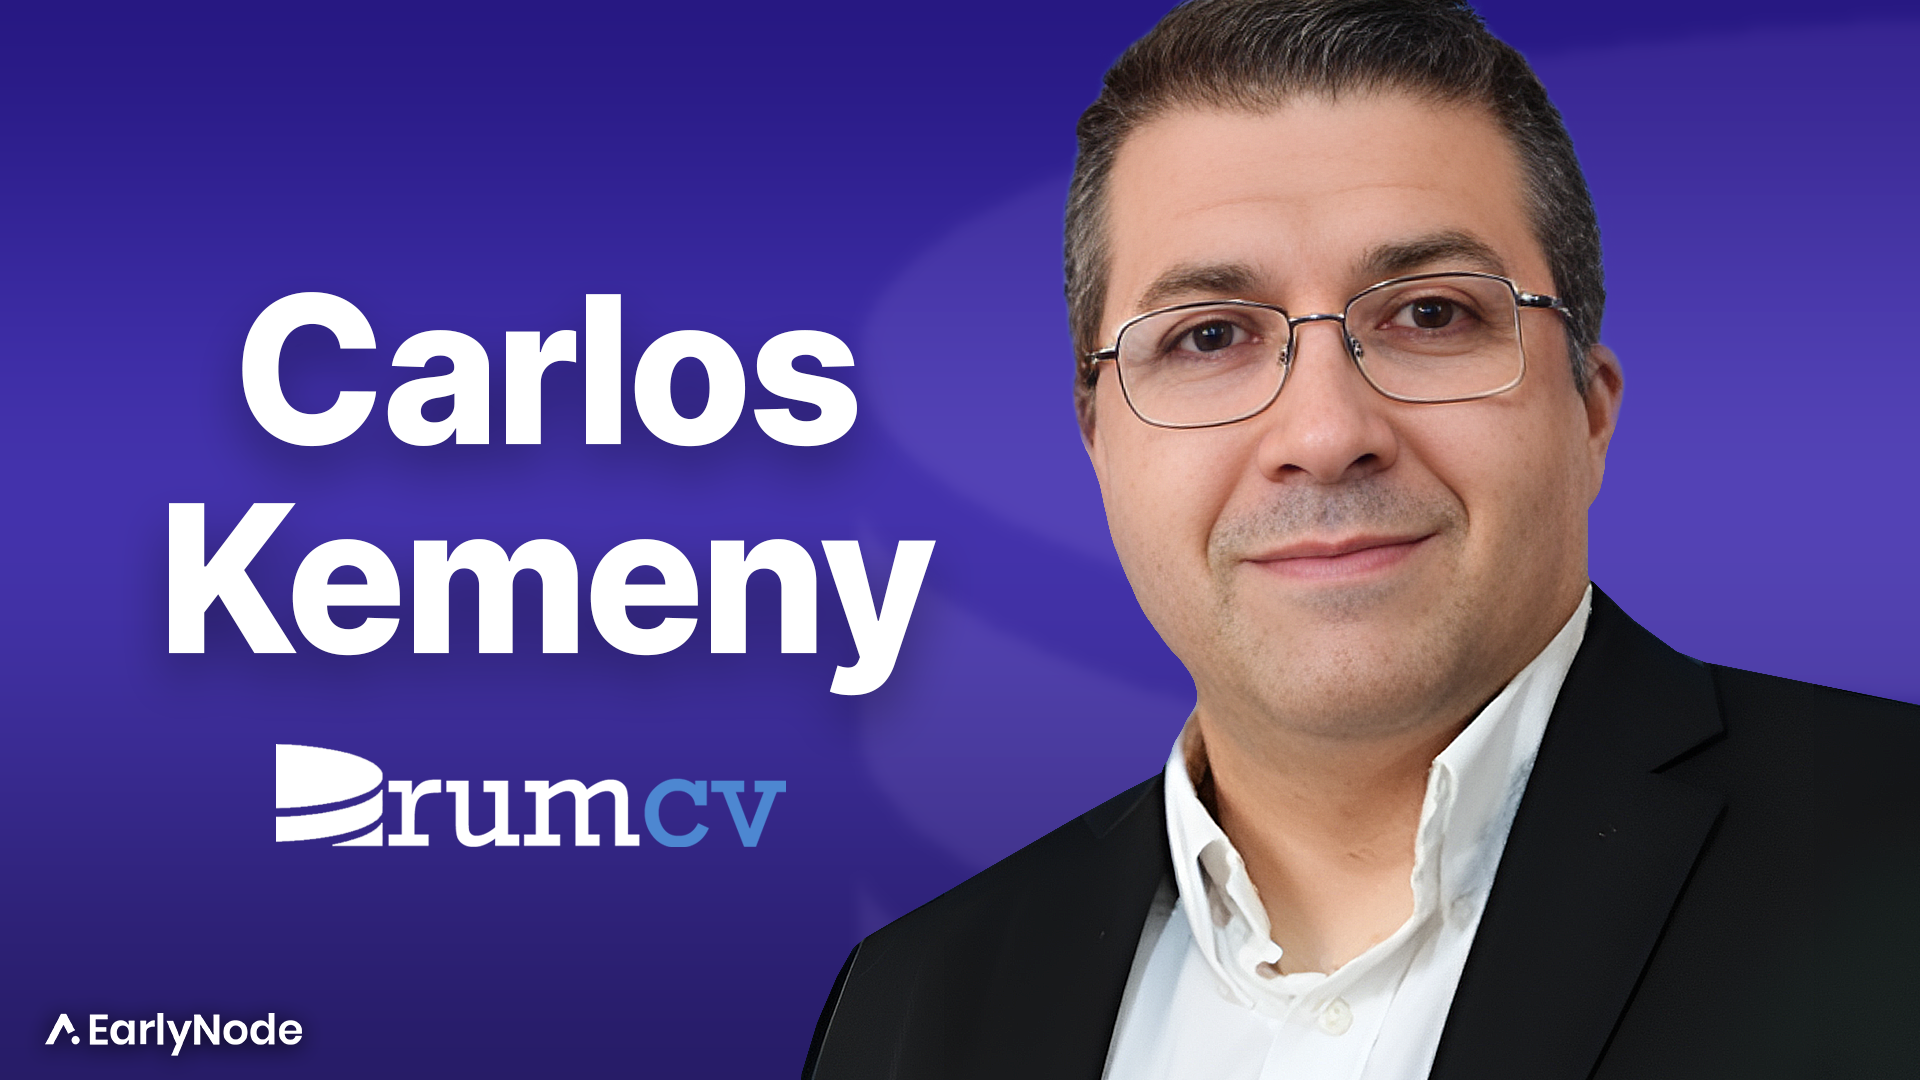 DrumCV Founder Carlos Kemeny on how to Analyze and Act on customer feedback based on AI insights